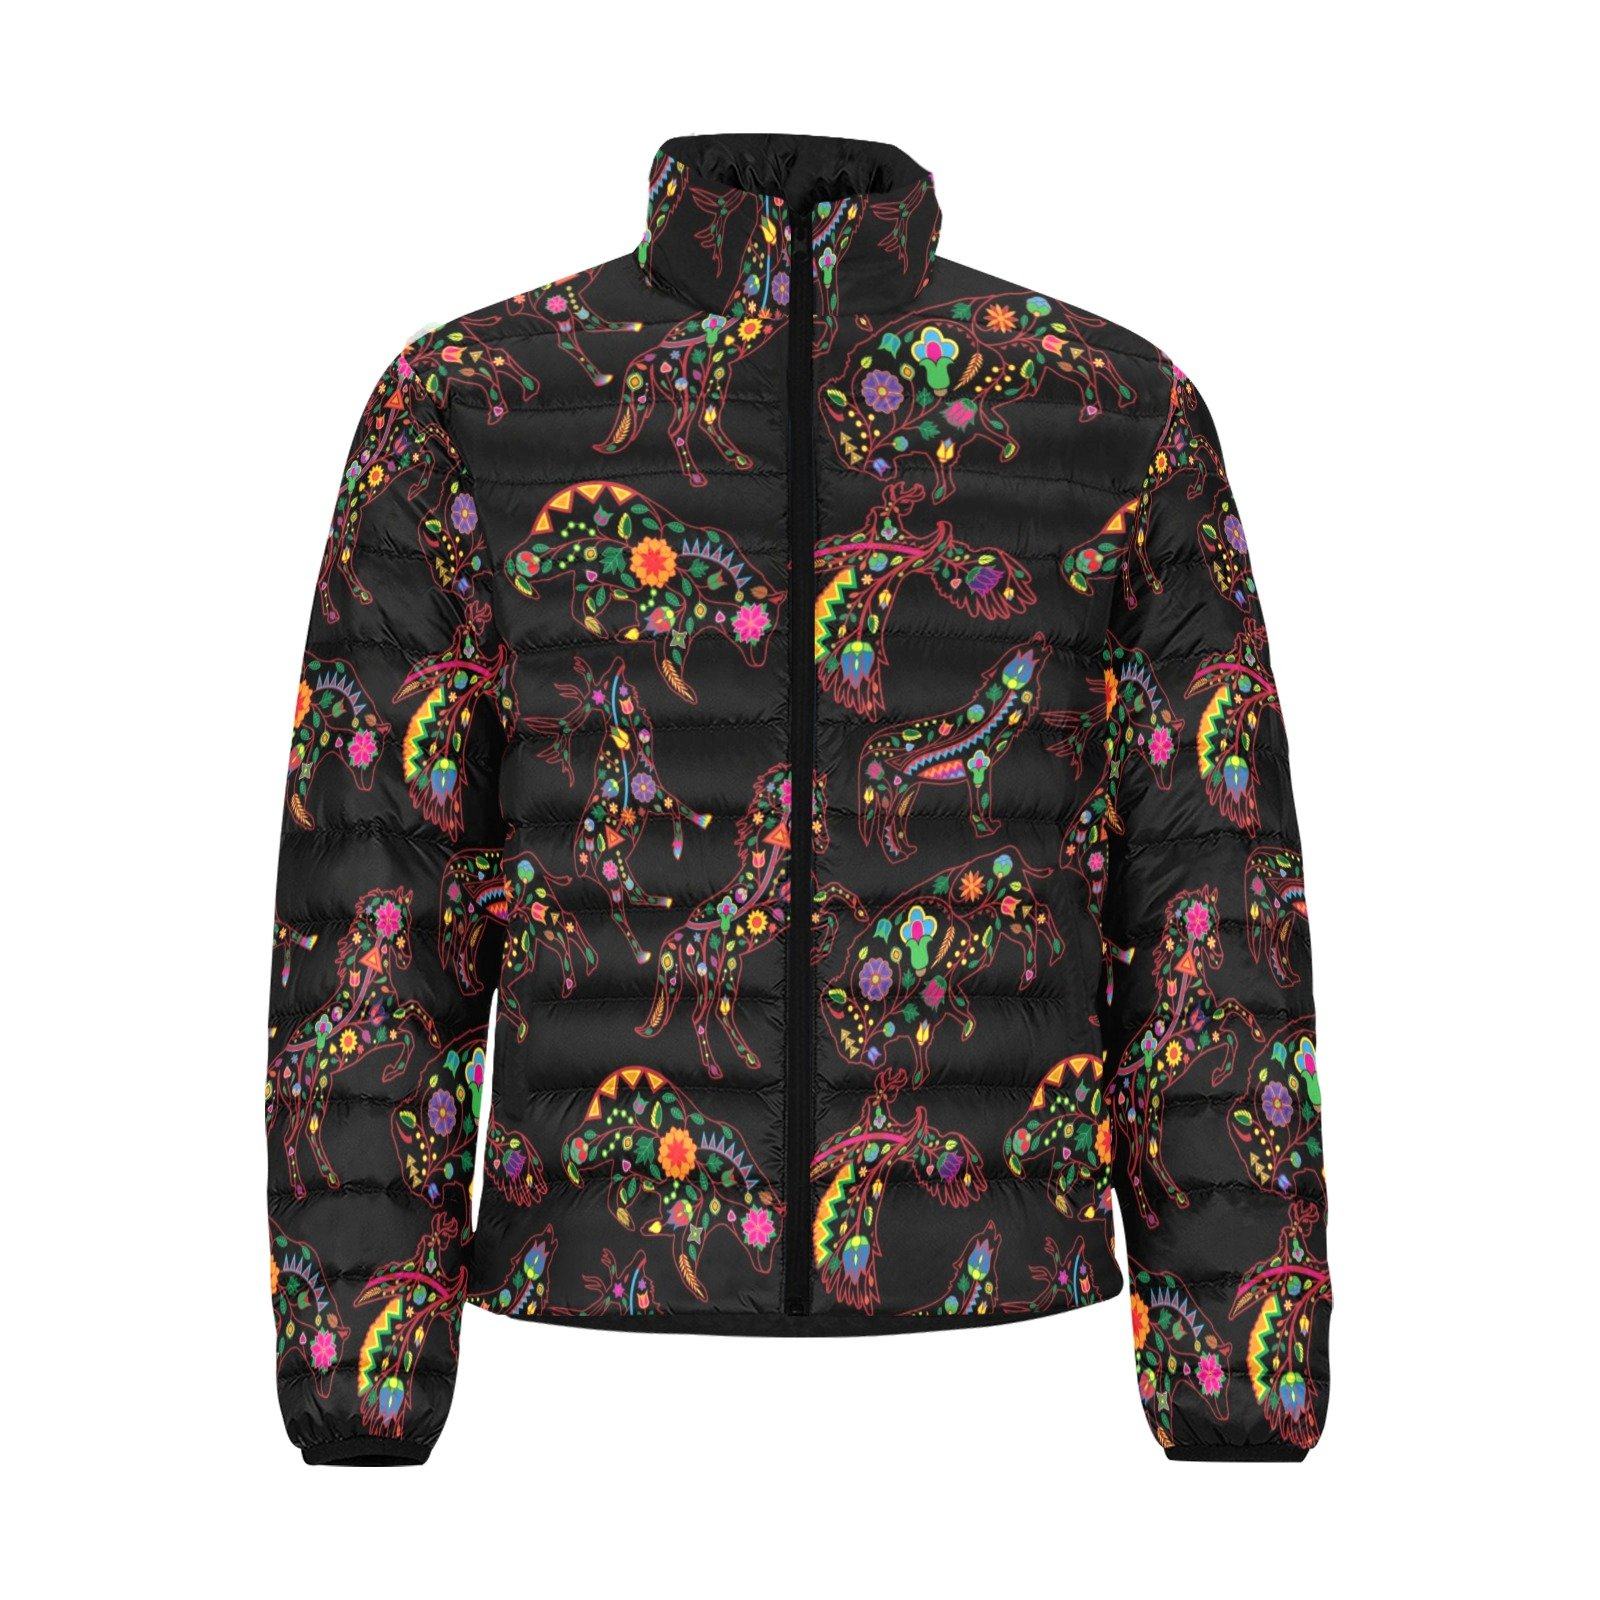 Floral Animals Men's Stand Collar Padded Jacket (Model H41) Men's Stand Collar Padded Jacket (H41) e-joyer 